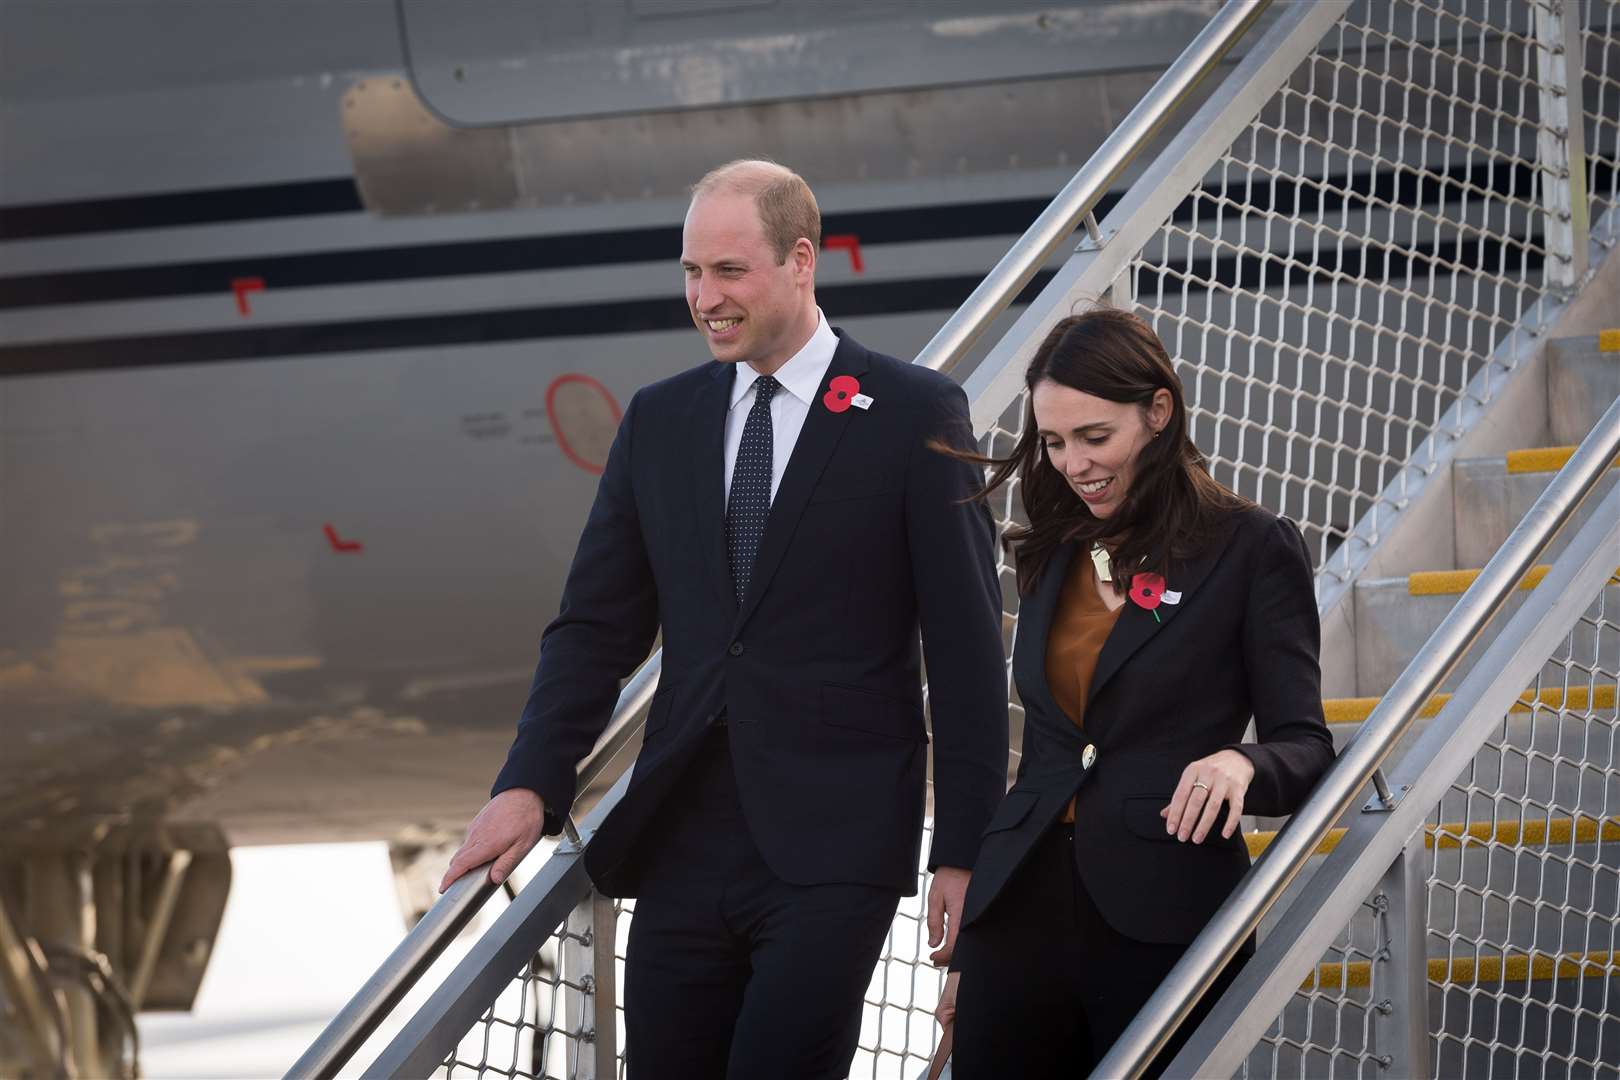 The Prince of Wales with New Zealand Prime Minister Jacinda Ardern arriving in Christchurch (Mark Tantrum/New Zealand Government/PA)